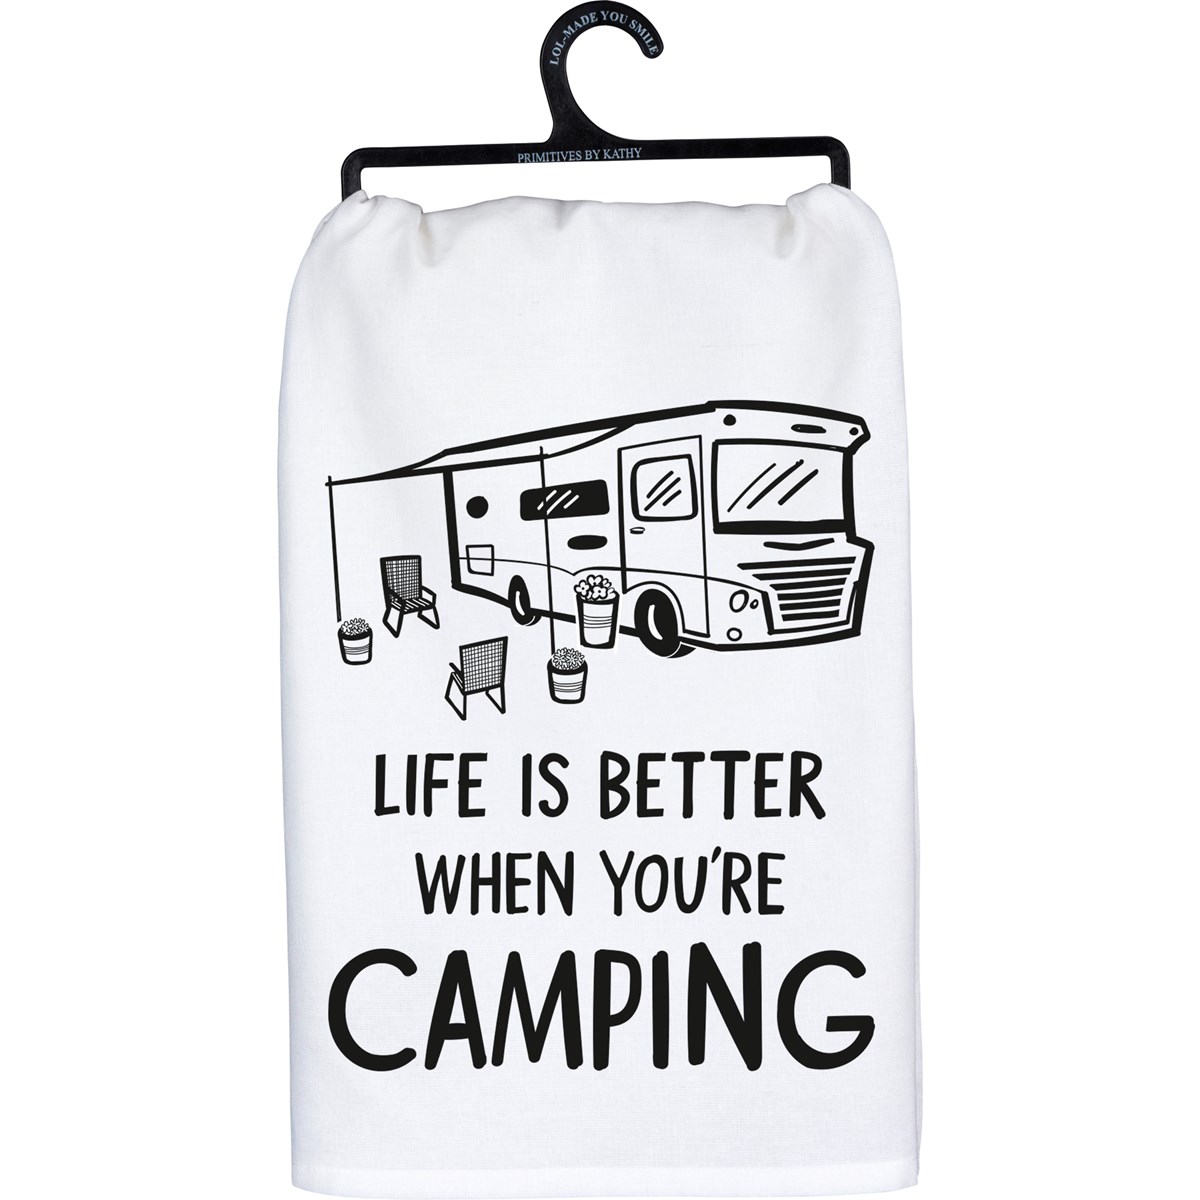 Life Is Better When You're Camping Kitchen Towel - Cotton